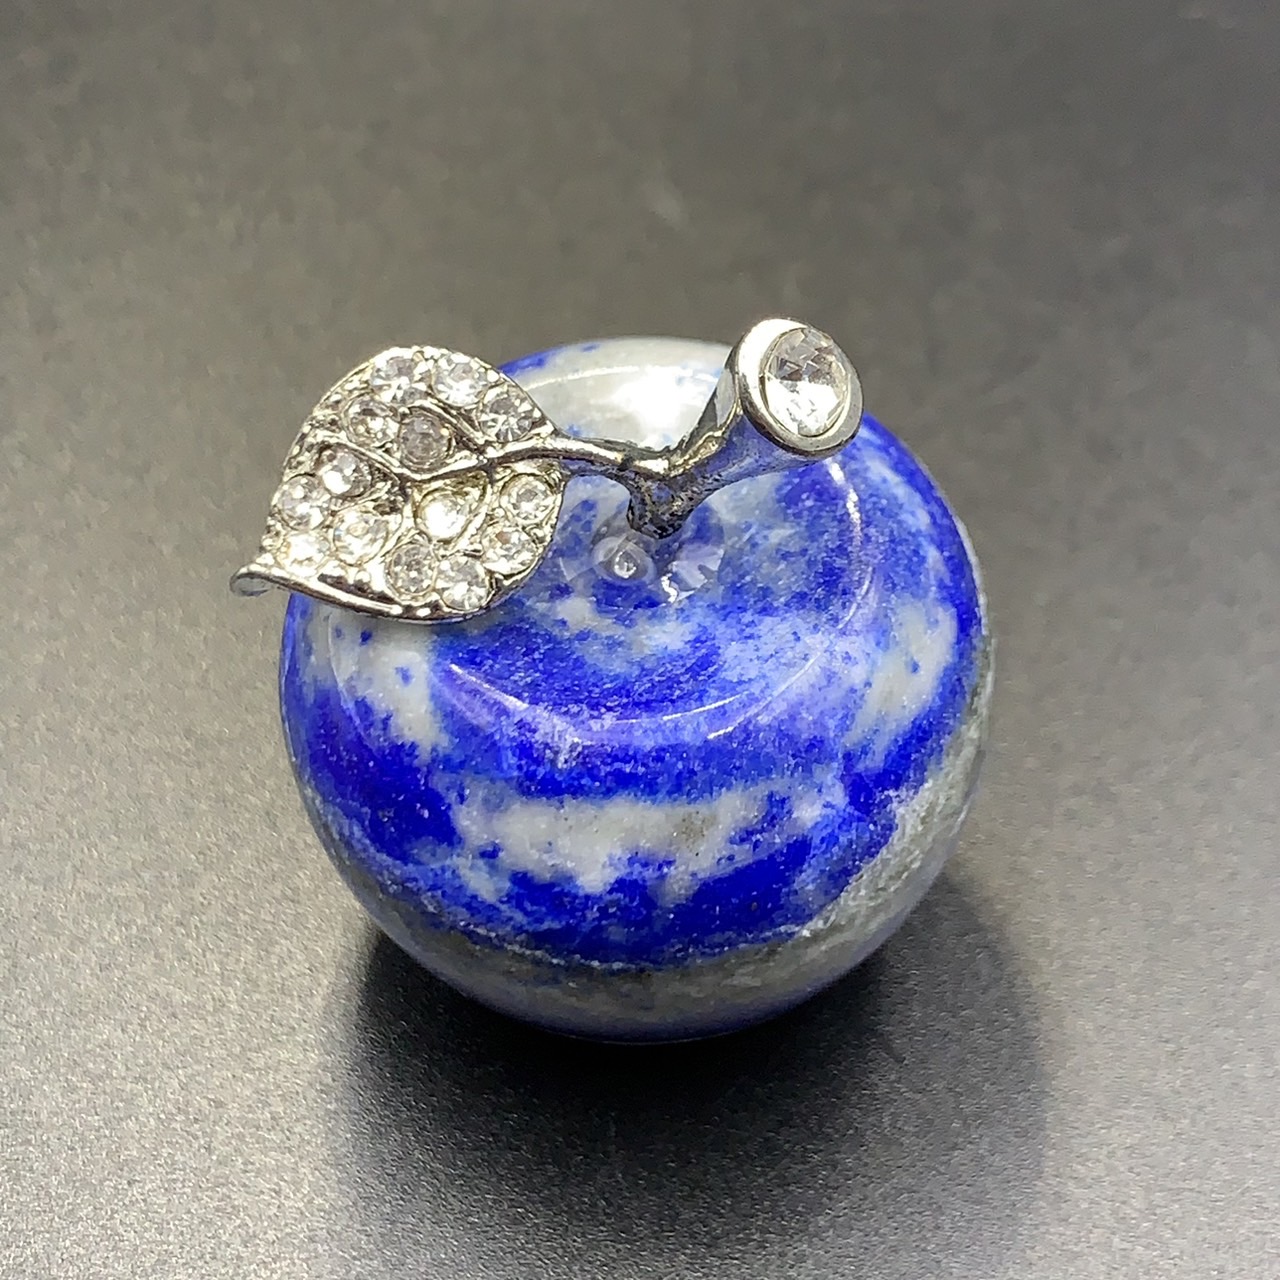 215.20 Cts Awesome Afghani Natural Lapis Lazuli With CZ & Stainless Steel Apple. LPZ-31 - Image 6 of 6